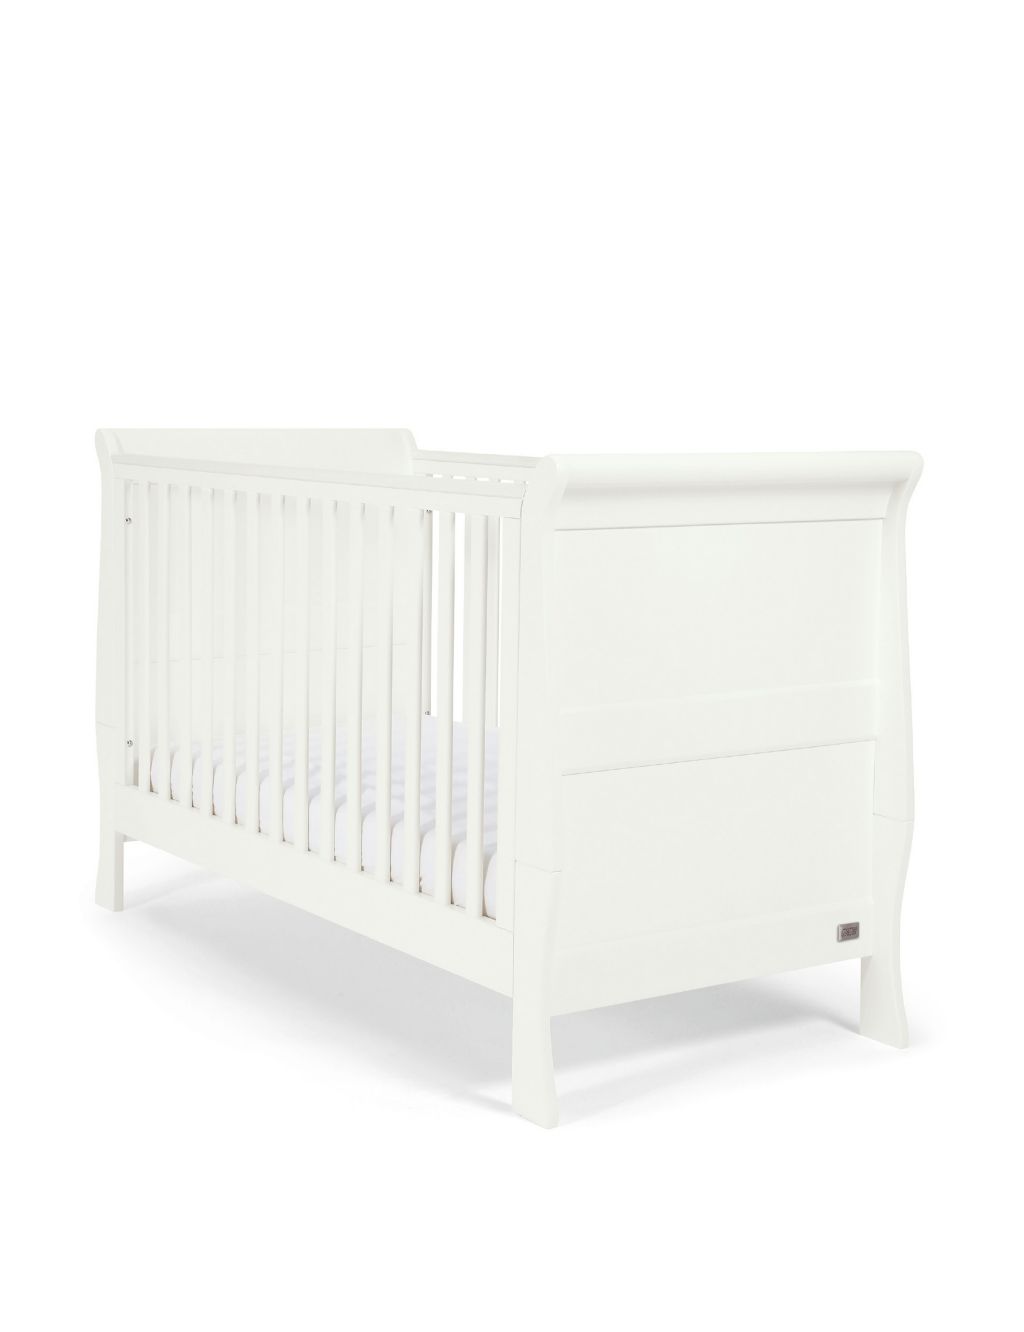 Mia 2 Piece Cotbed Set with Dresser image 4